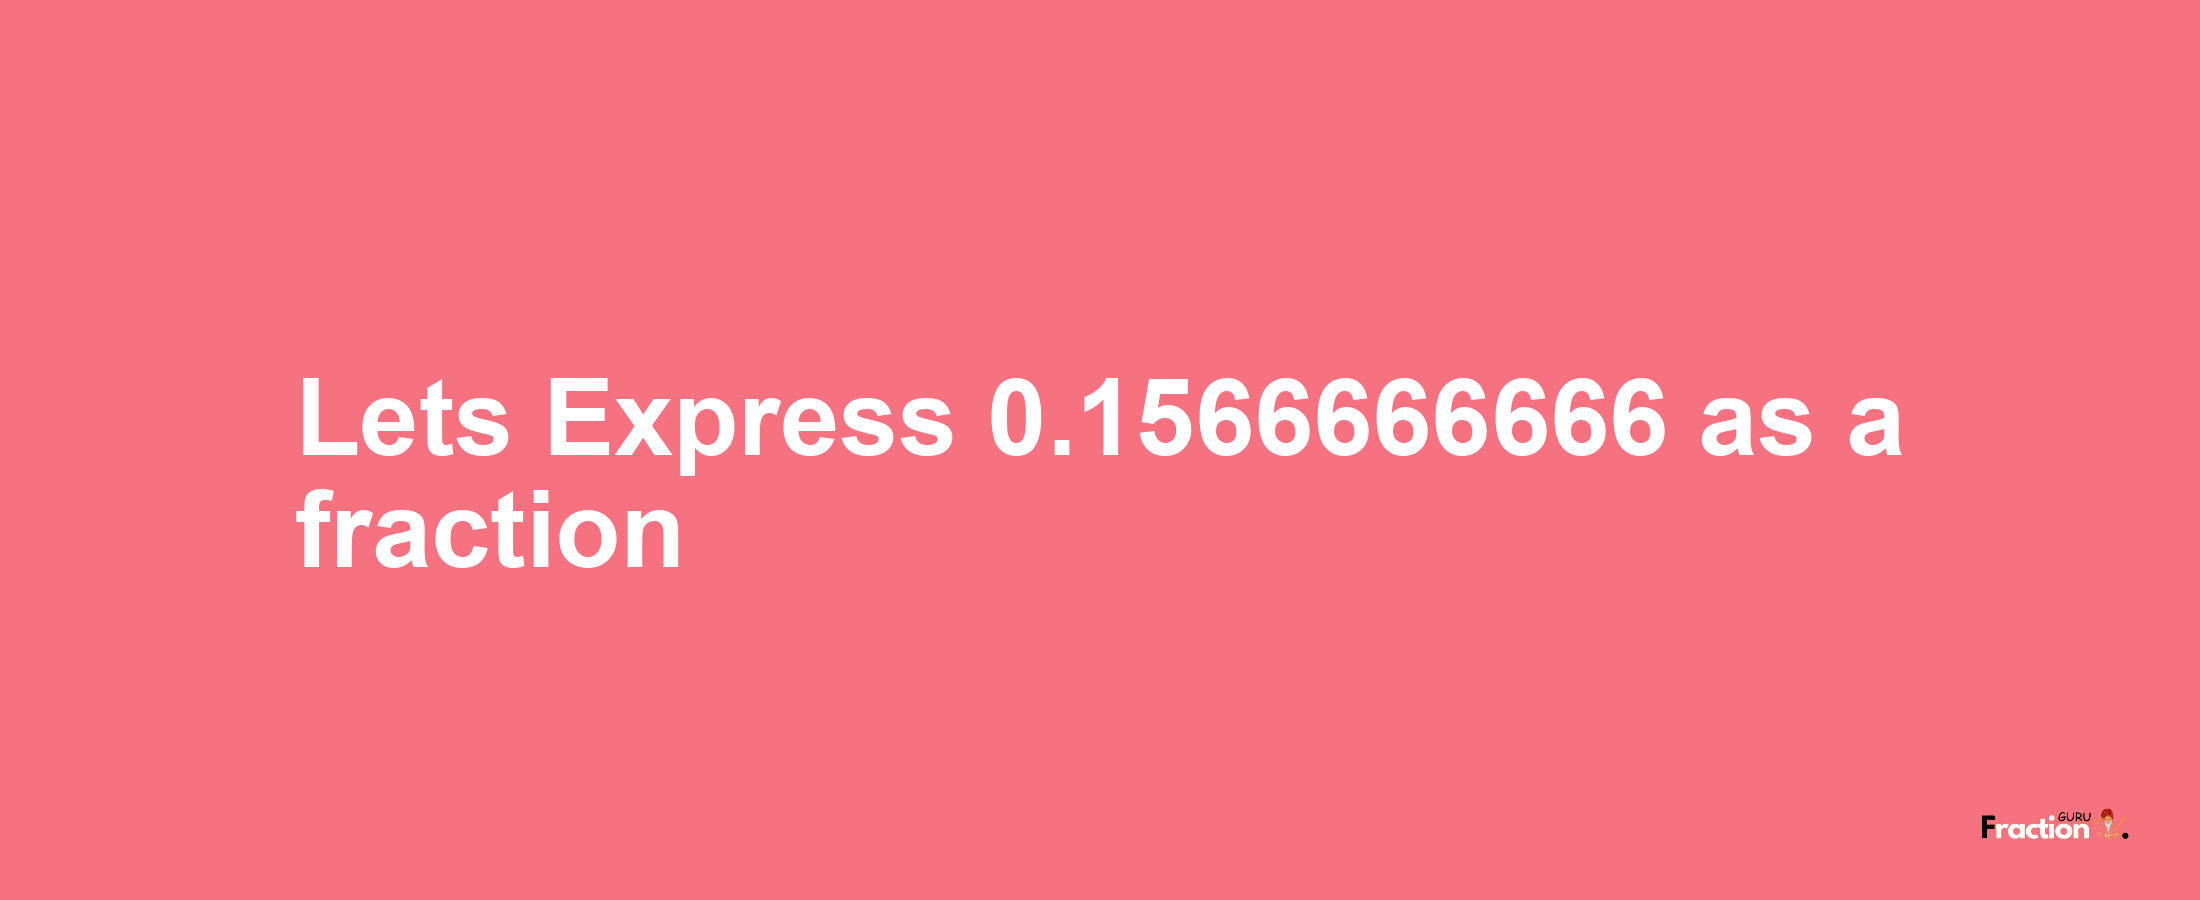 Lets Express 0.1566666666 as afraction